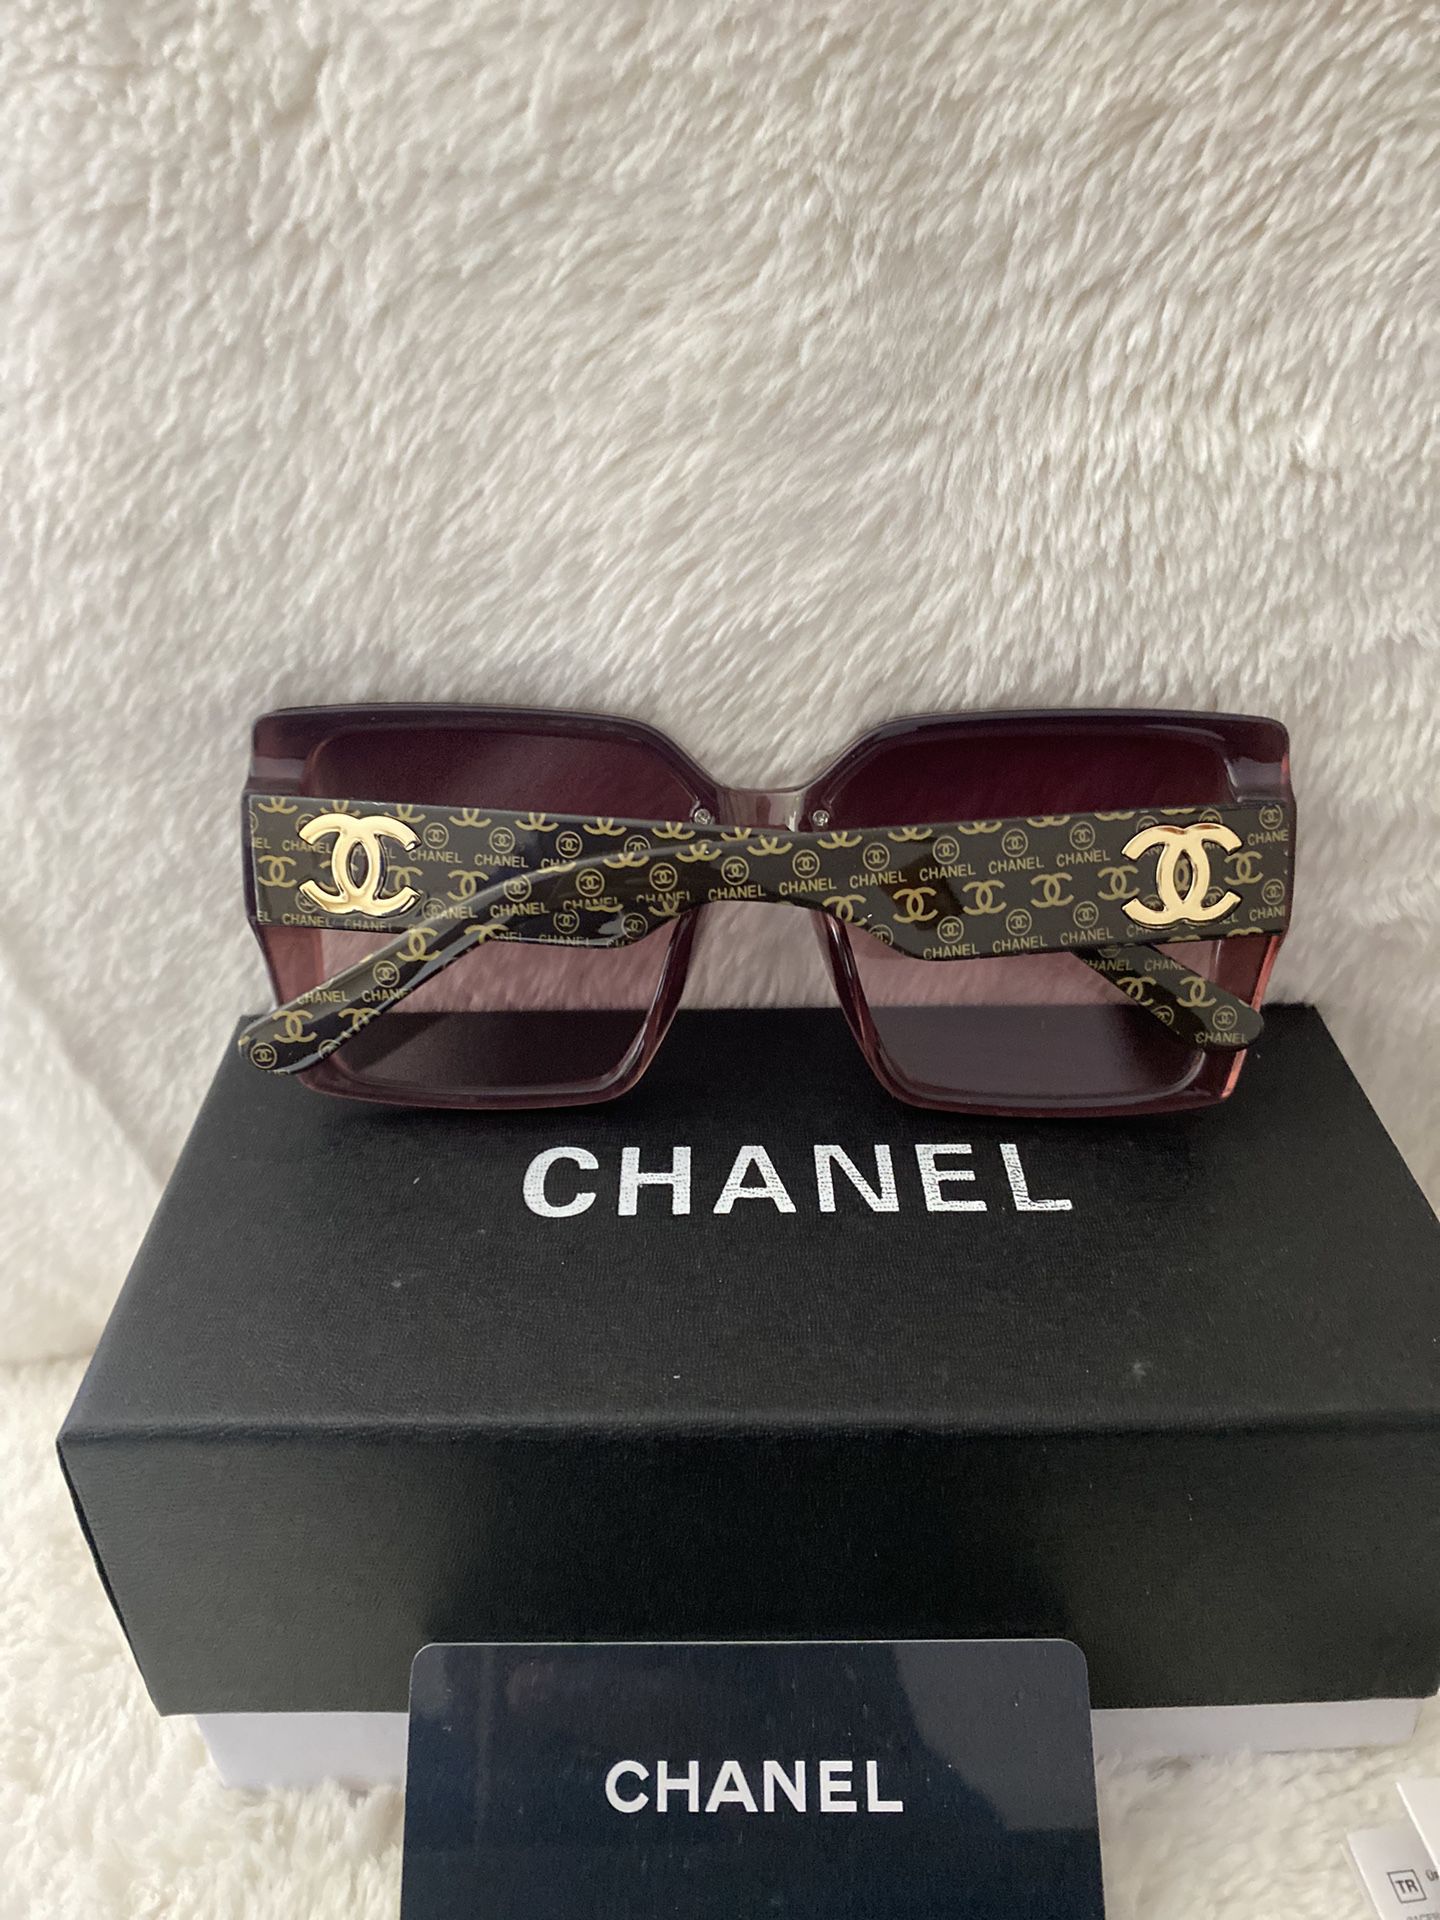 Chanel Sunglasses for Sale in Owings Mills, MD - OfferUp